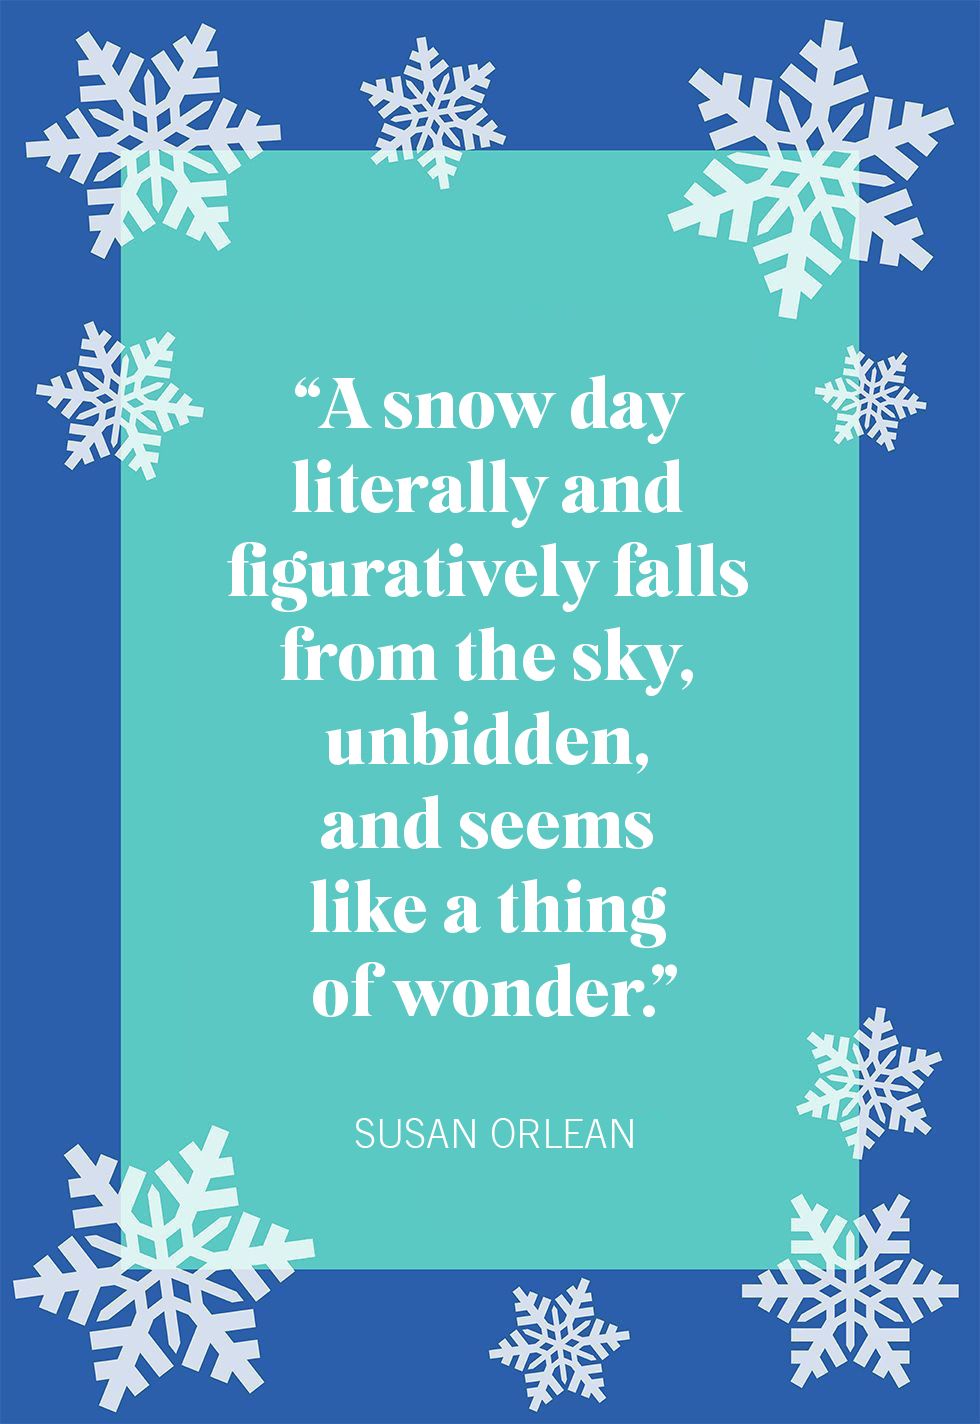 snowy day quotes